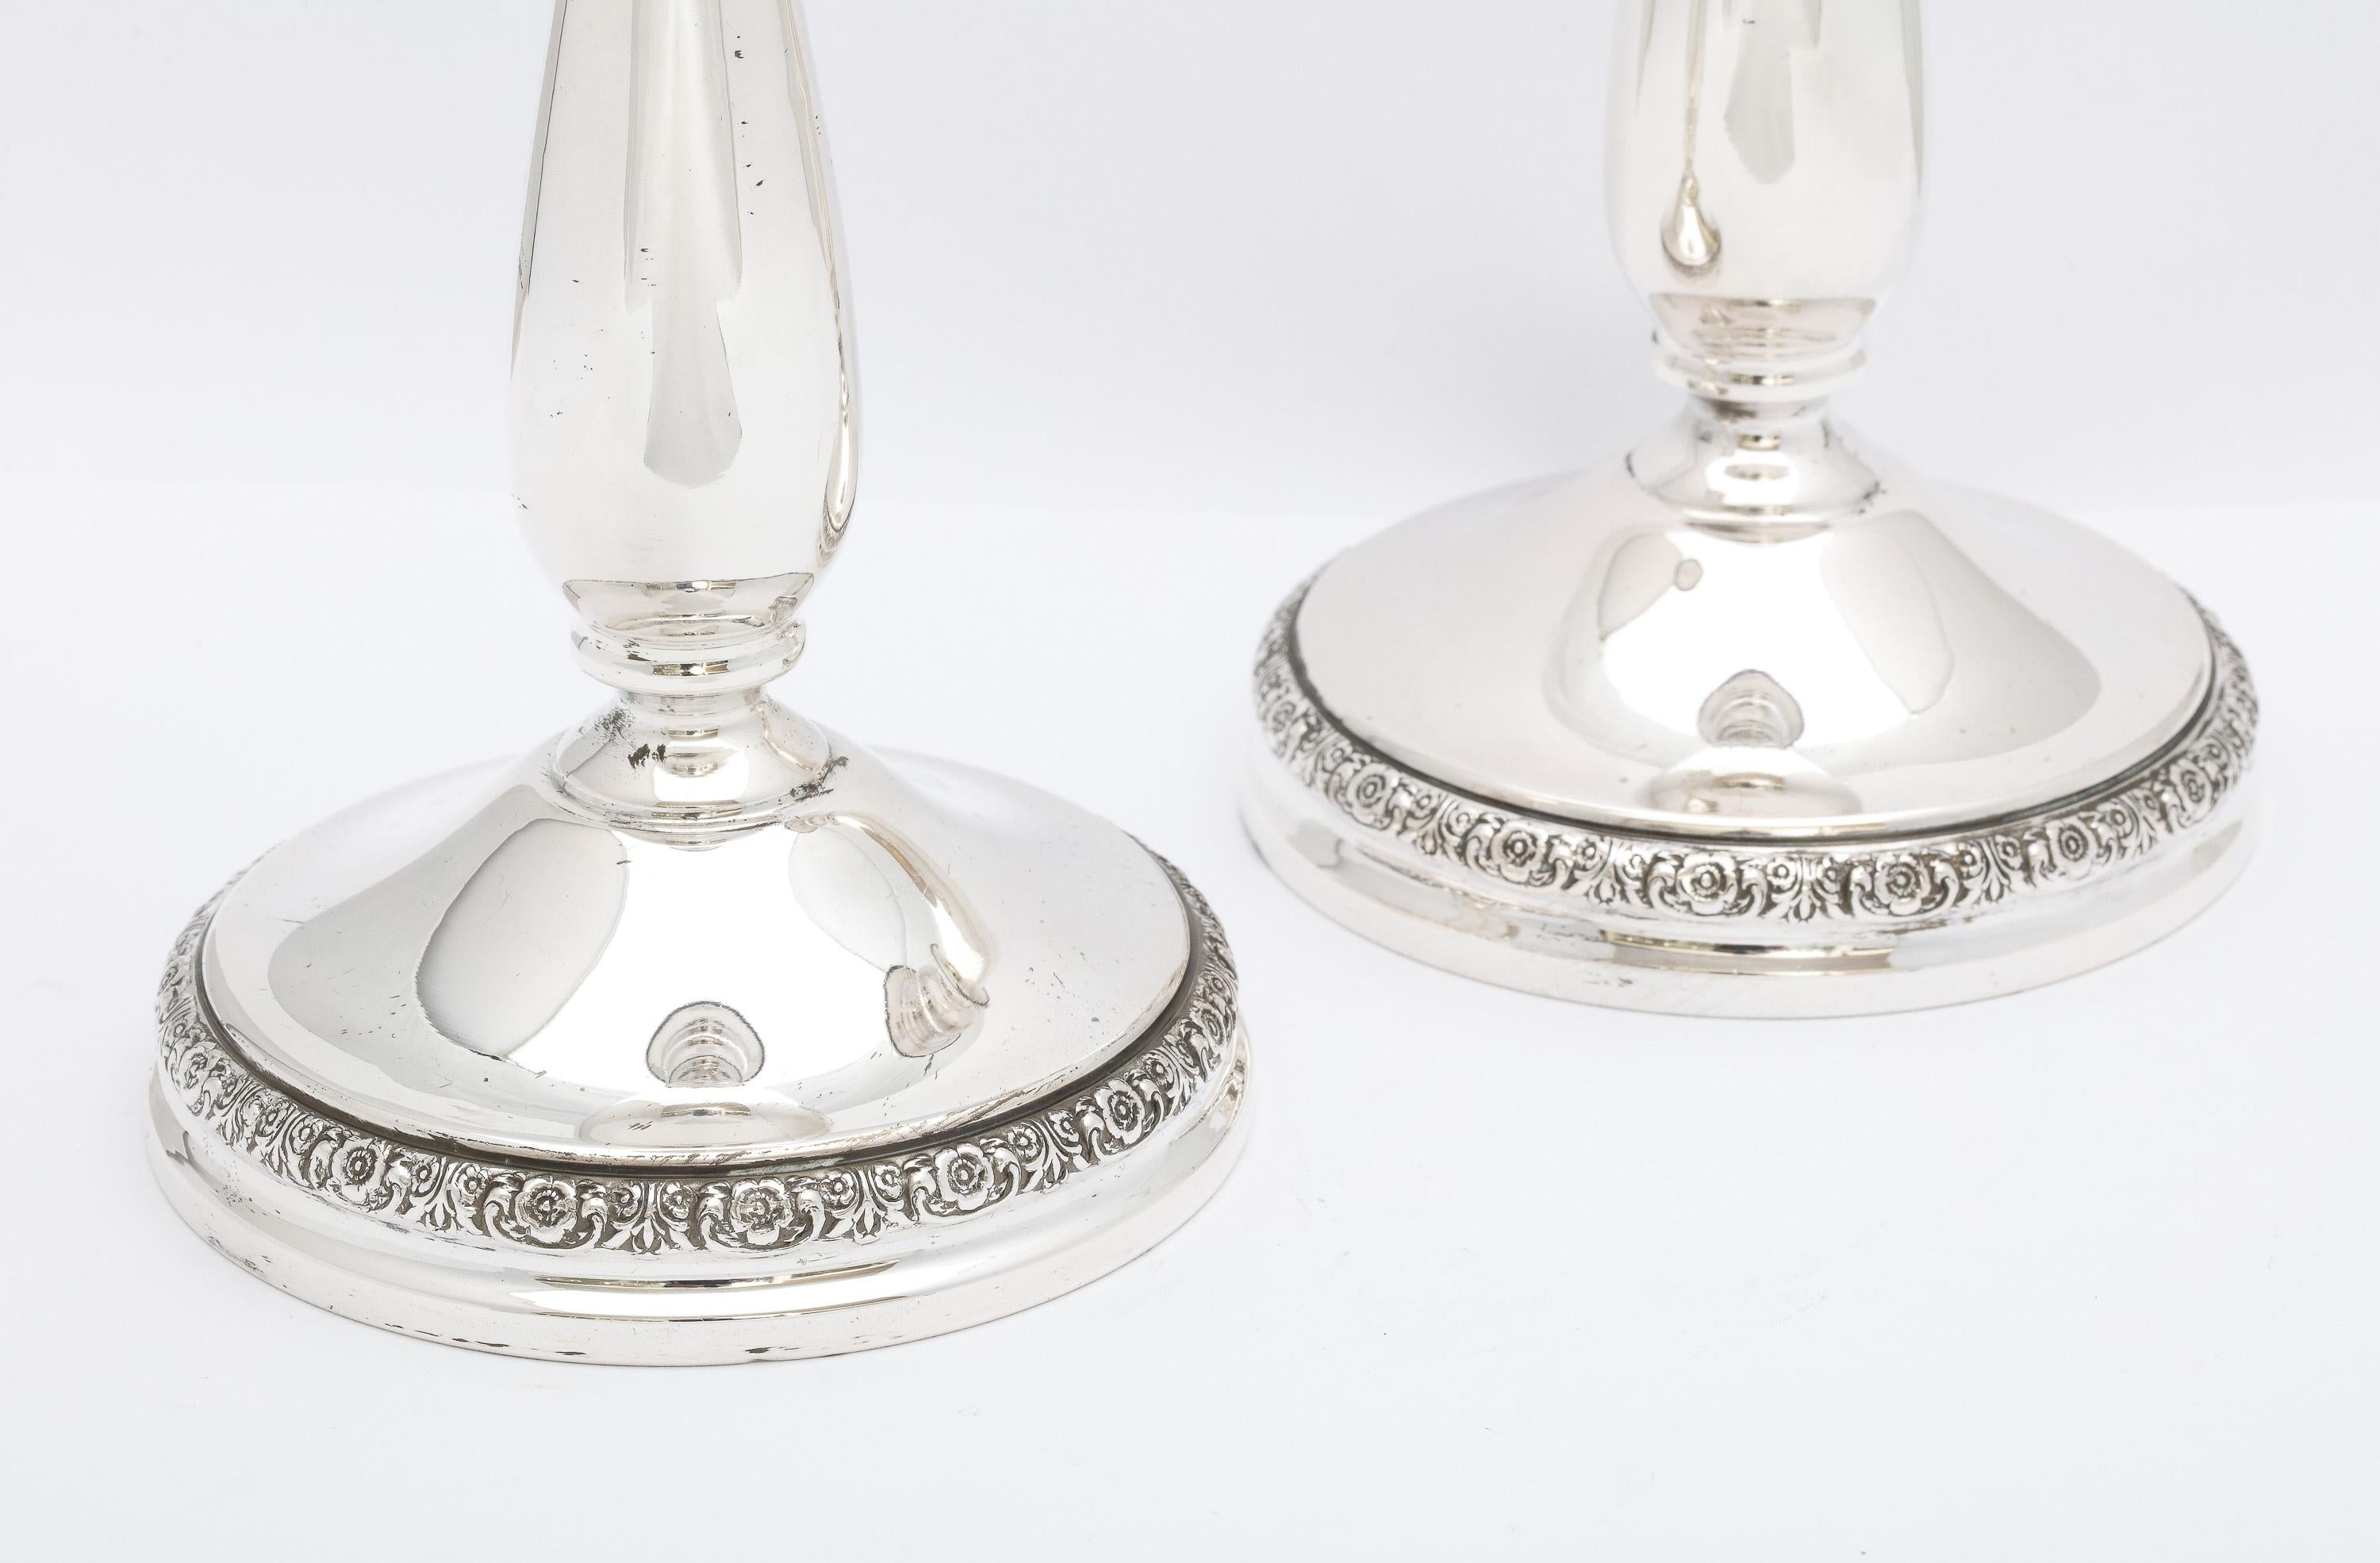 American Pair of Victorian-Style Sterling Silver Candlesticks